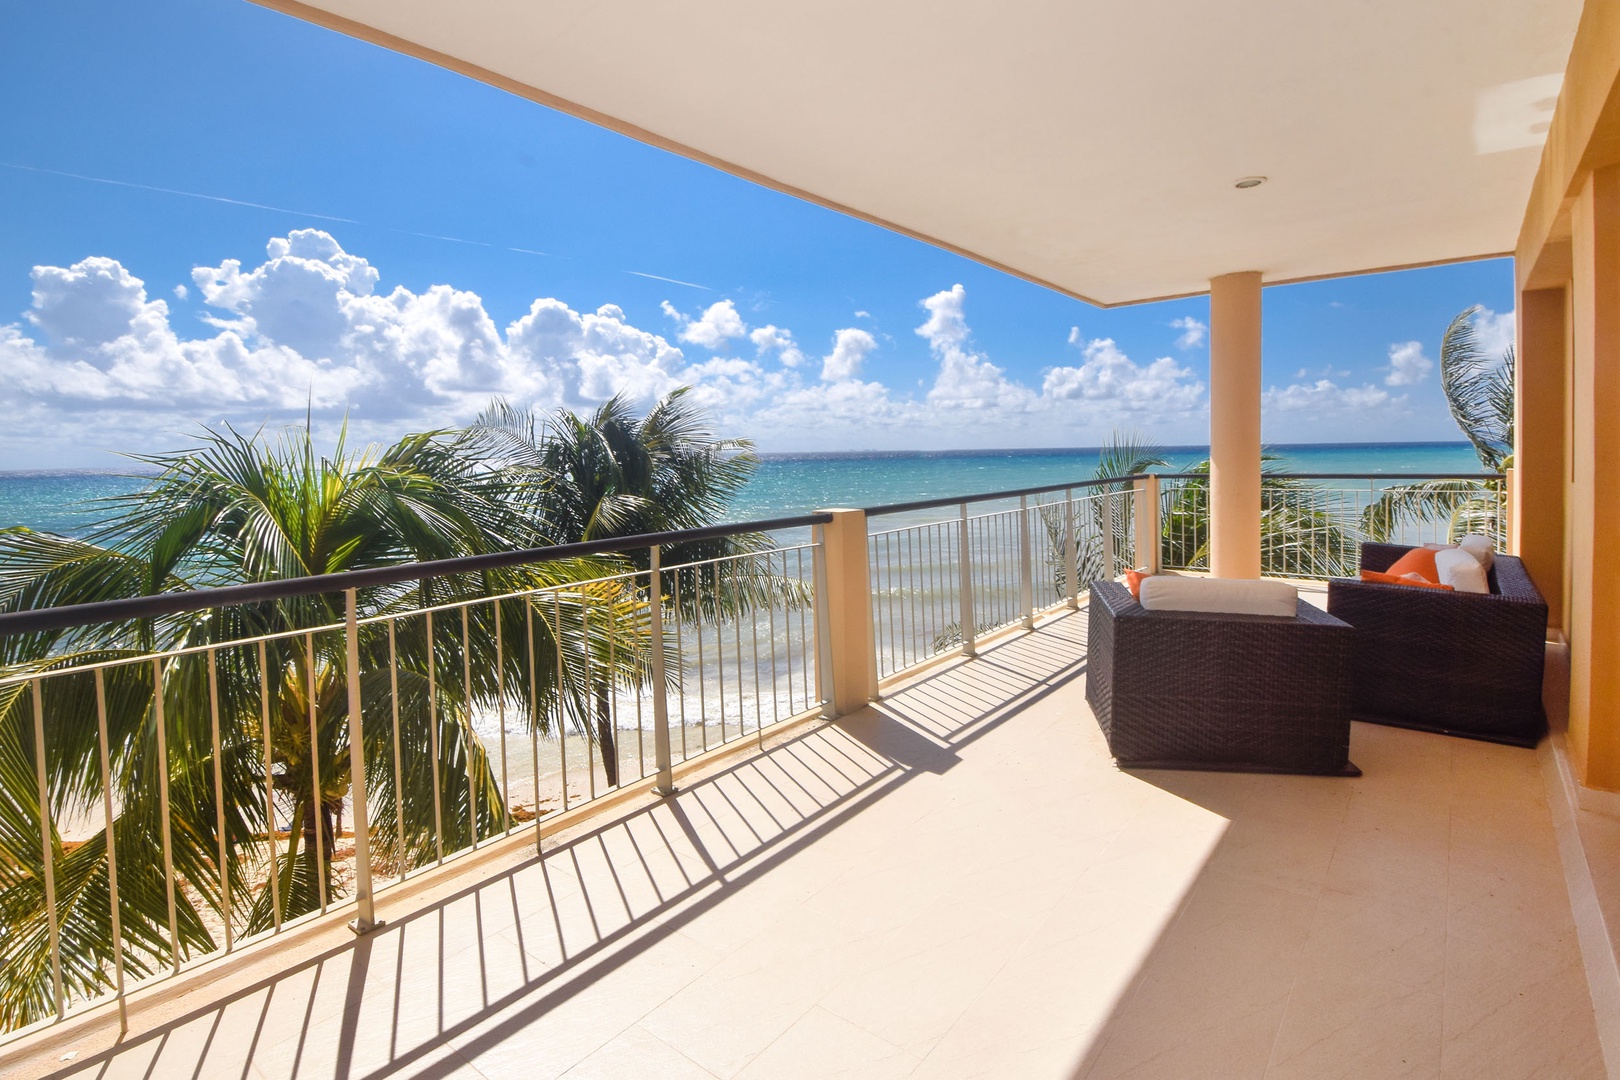 True Oceanfront End Unit Condo, Directly on the Ocean!Perfect View - Surf 309